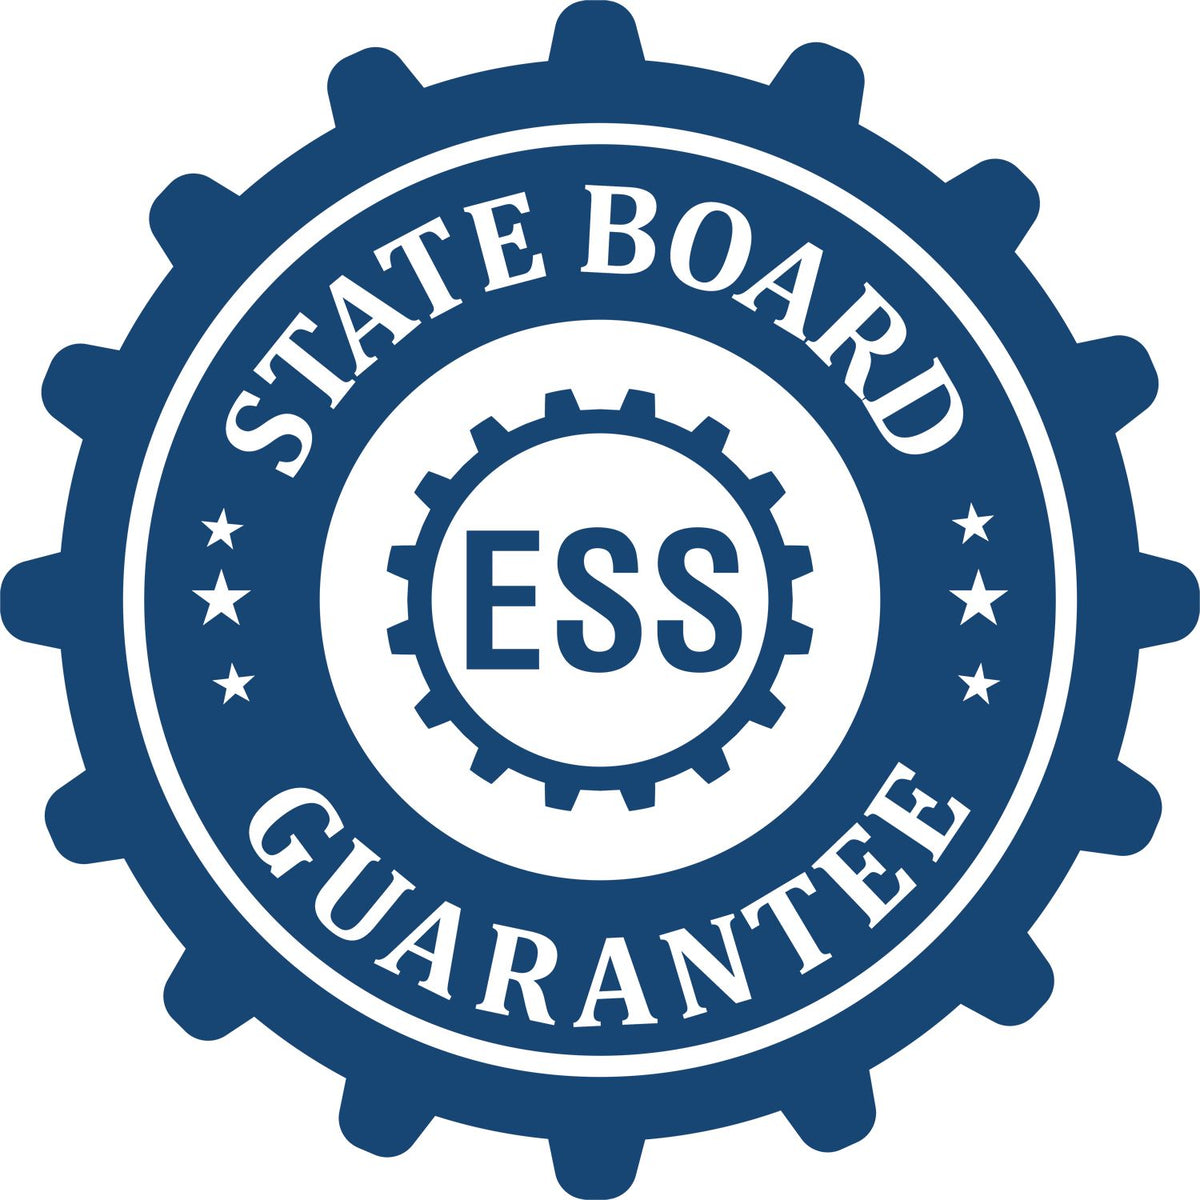 An emblem in a gear shape illustrating a state board guarantee for the State of Georgia Extended Long Reach Engineer Seal product.